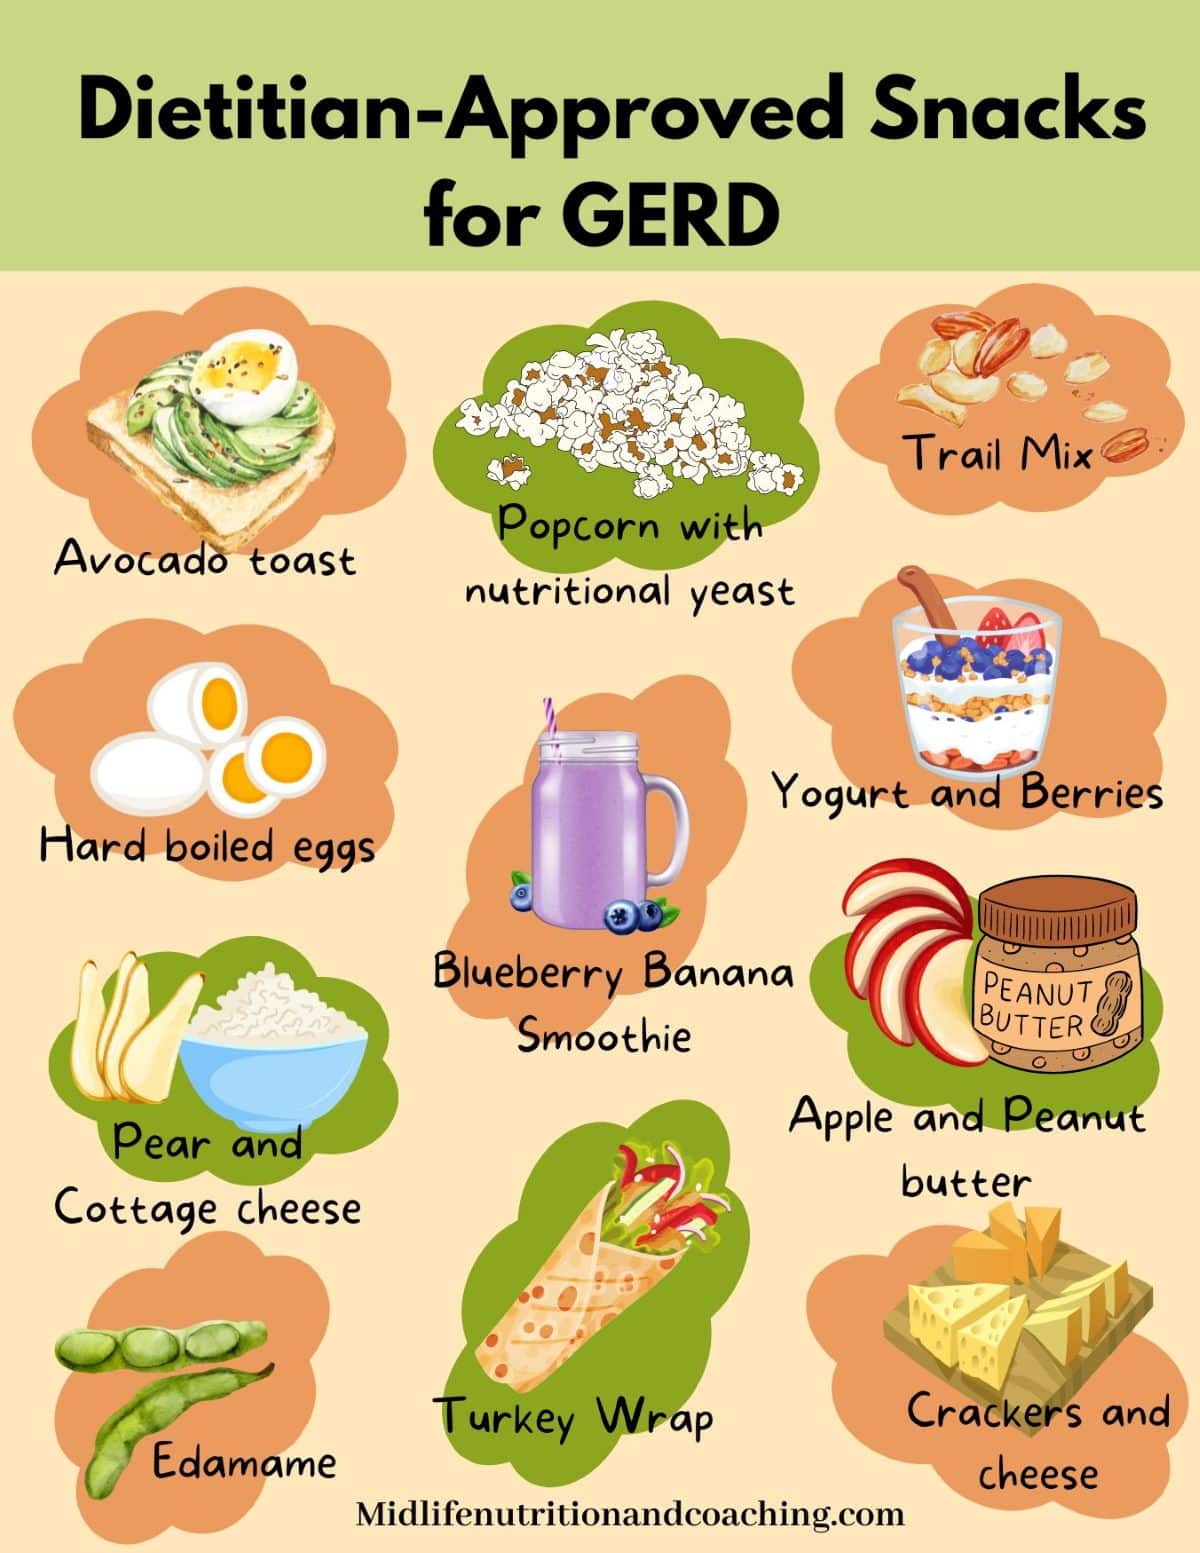 Visual list of dietitian-approved snacks for GERD